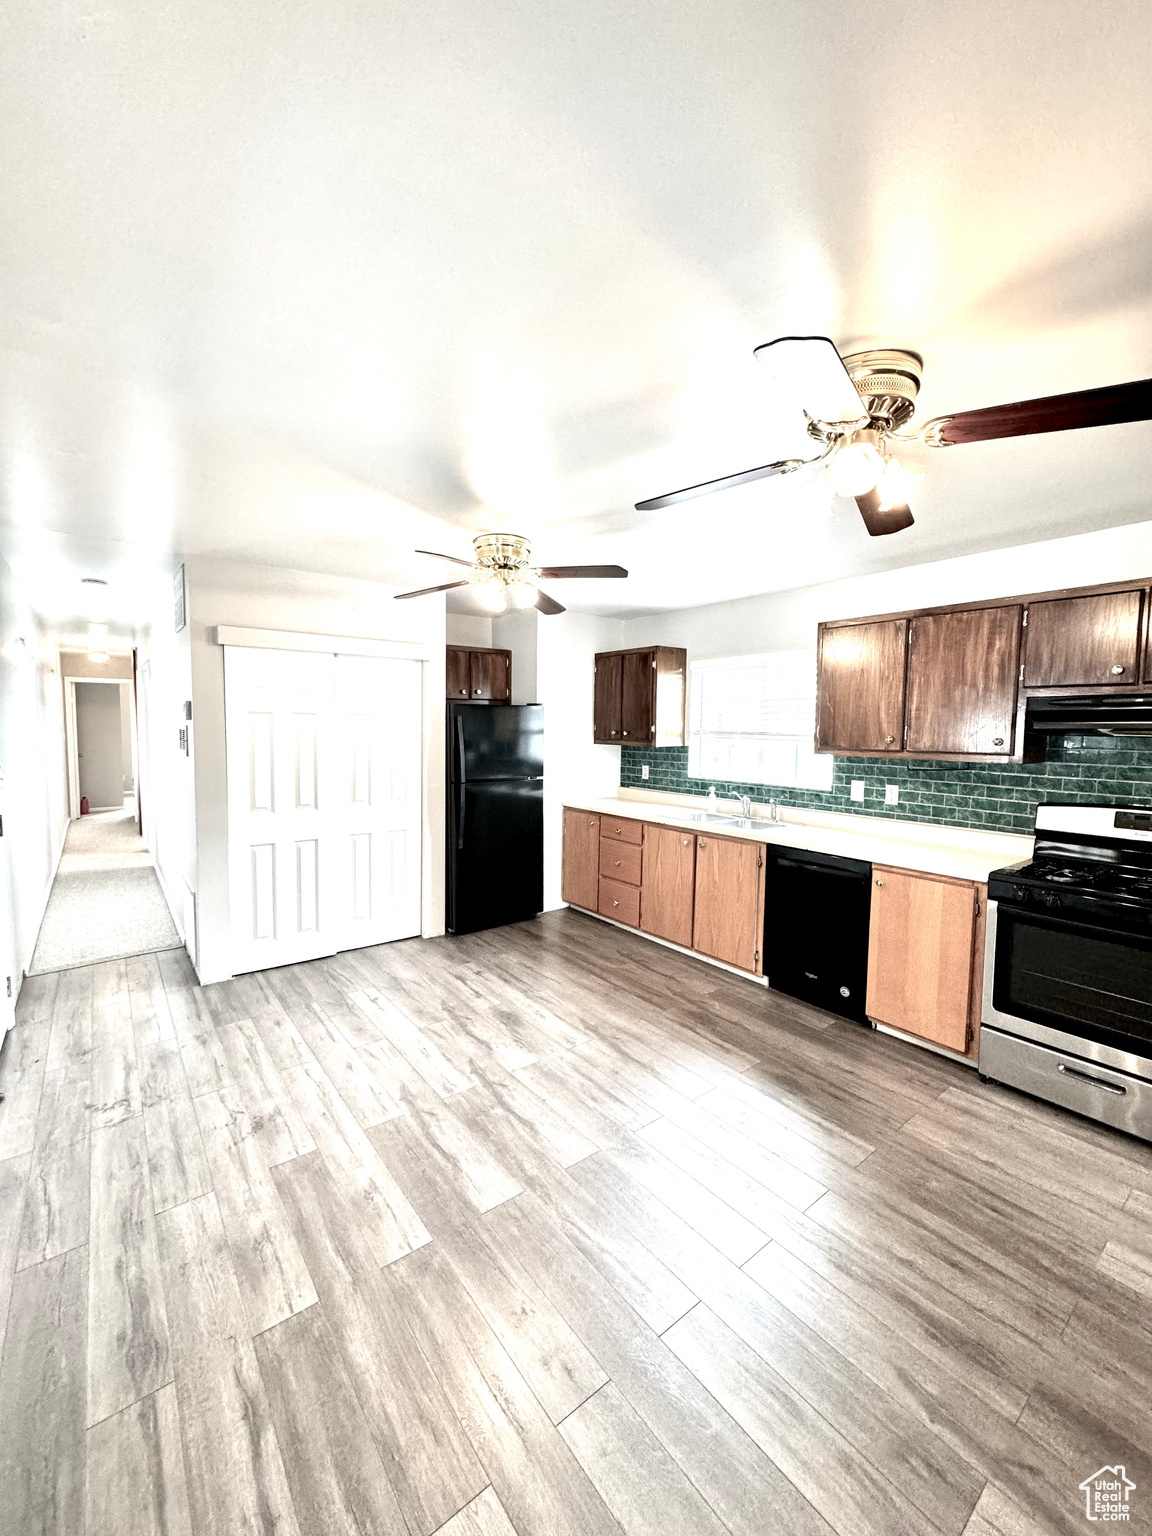 Kitchen with range hood, ceiling fan, light wood-type flooring, and black appliances